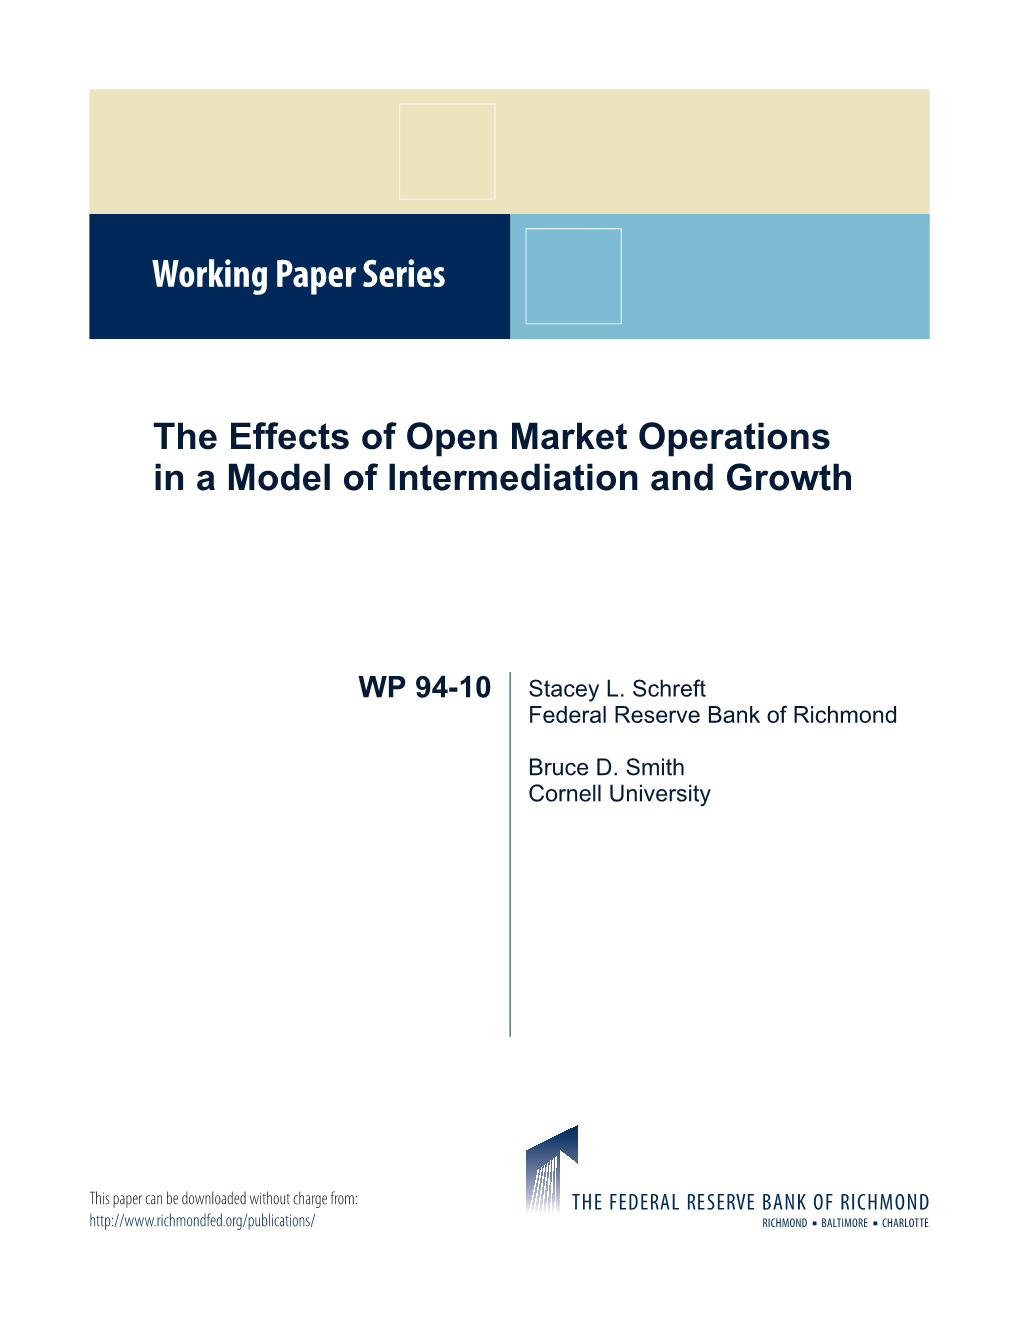 The Effects of Open Market Operations a Model of Intermediation and Growth